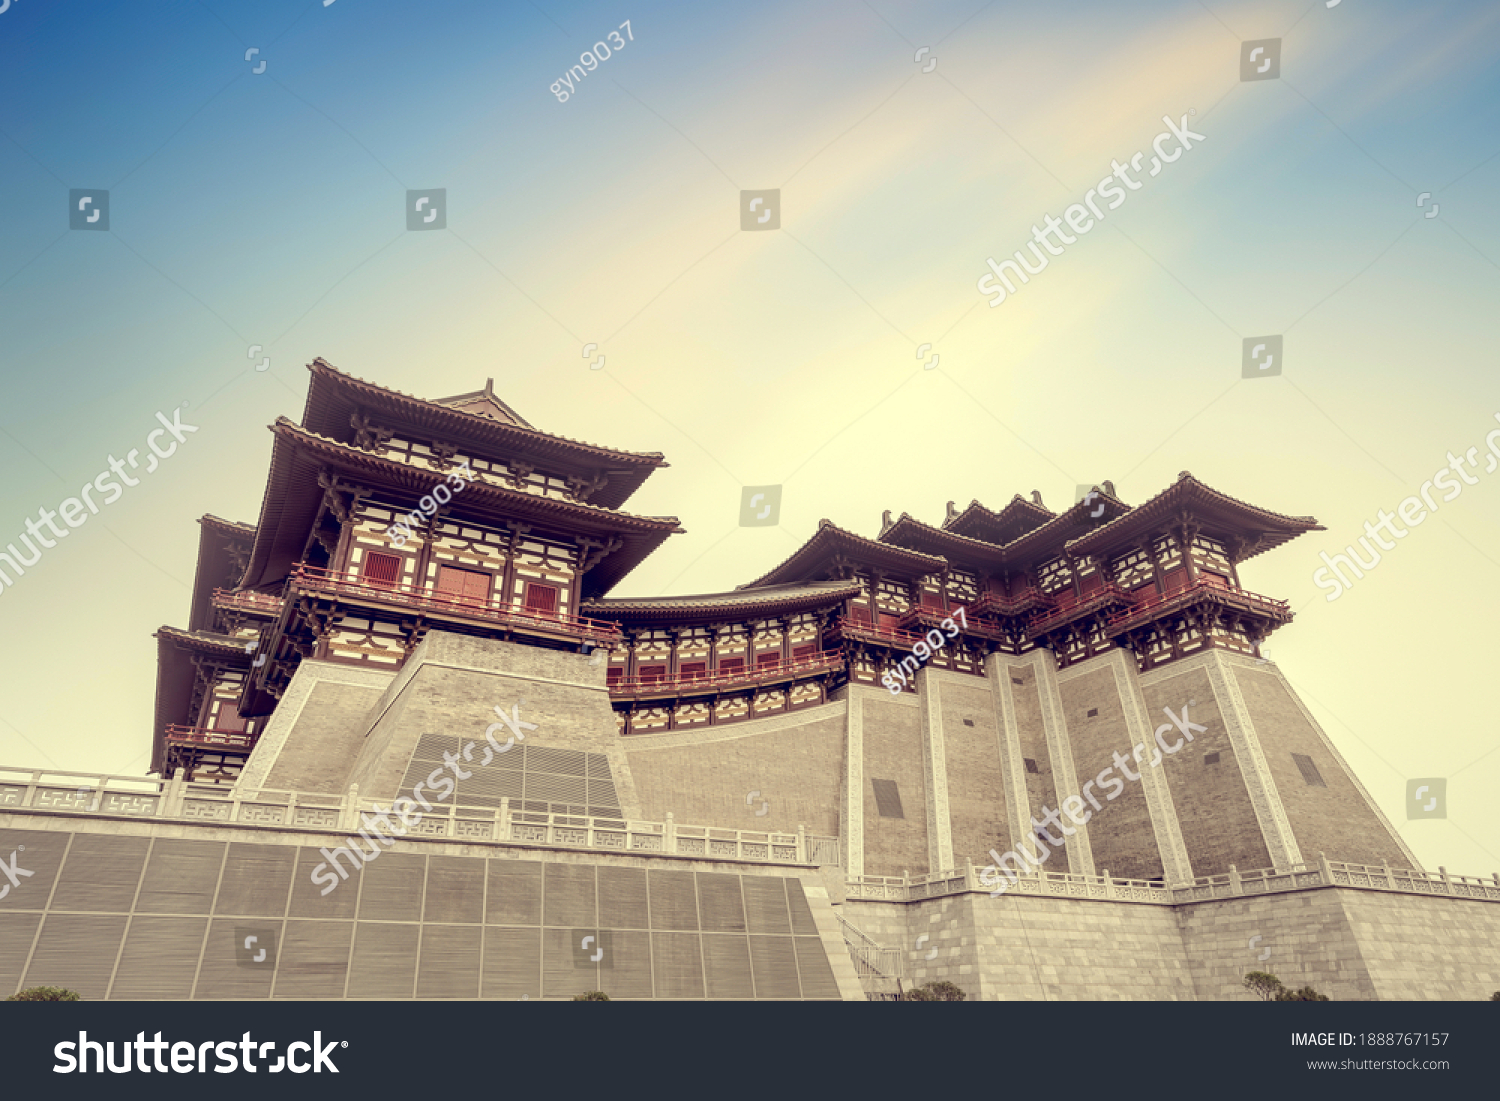 Yingtian Gate is the south gate of Luoyang City in the Sui and Tang Dynasties. It was built in 605. #1888767157